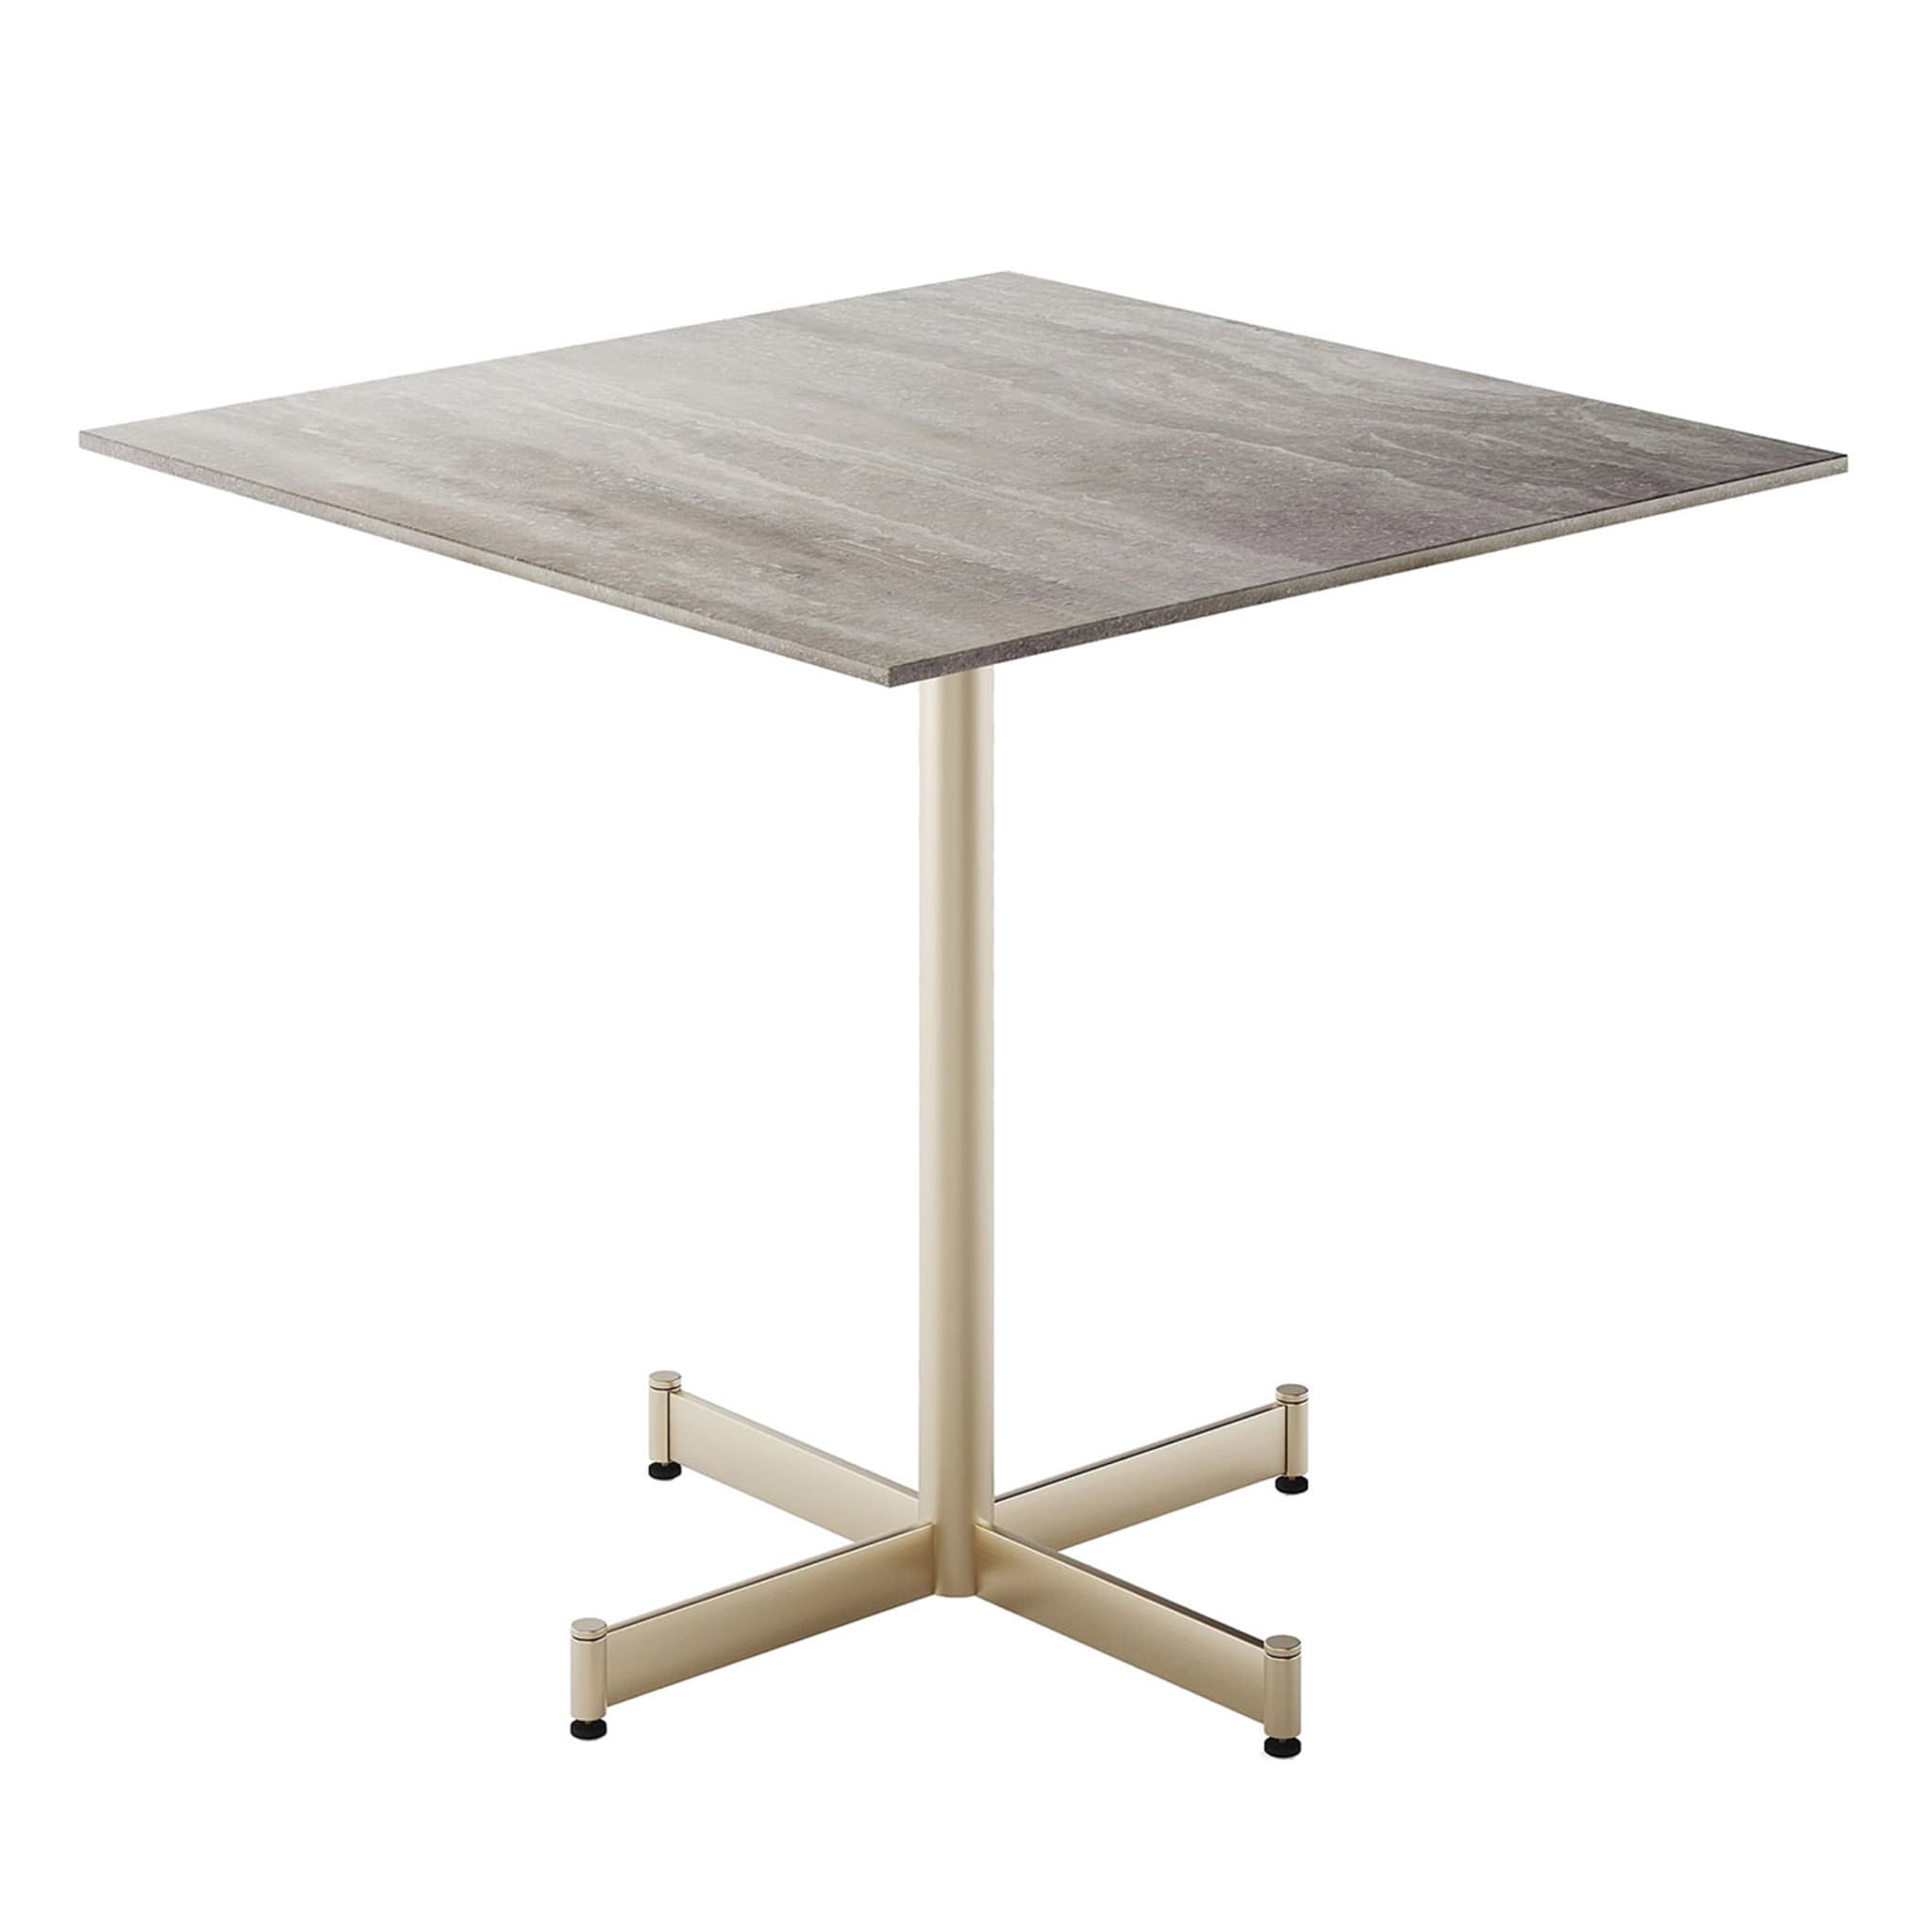 Fly Square Gray ceramic top & Champagne base Bistro Table by Braid Design Lab - Main view